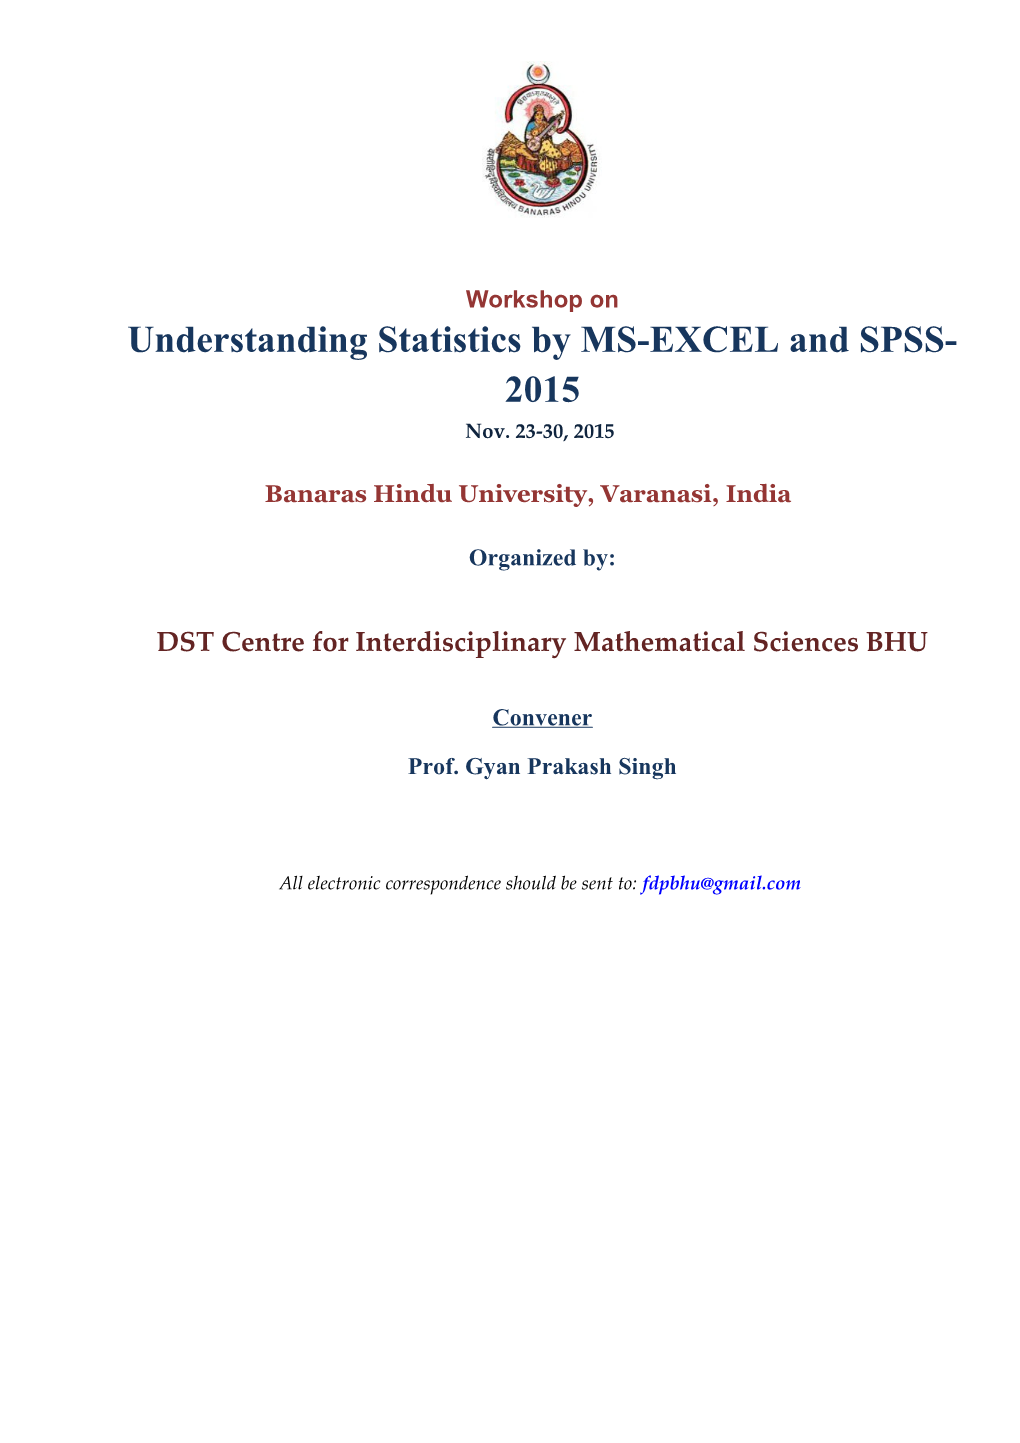 Understanding Statistics by MS-EXCEL and SPSS-2015